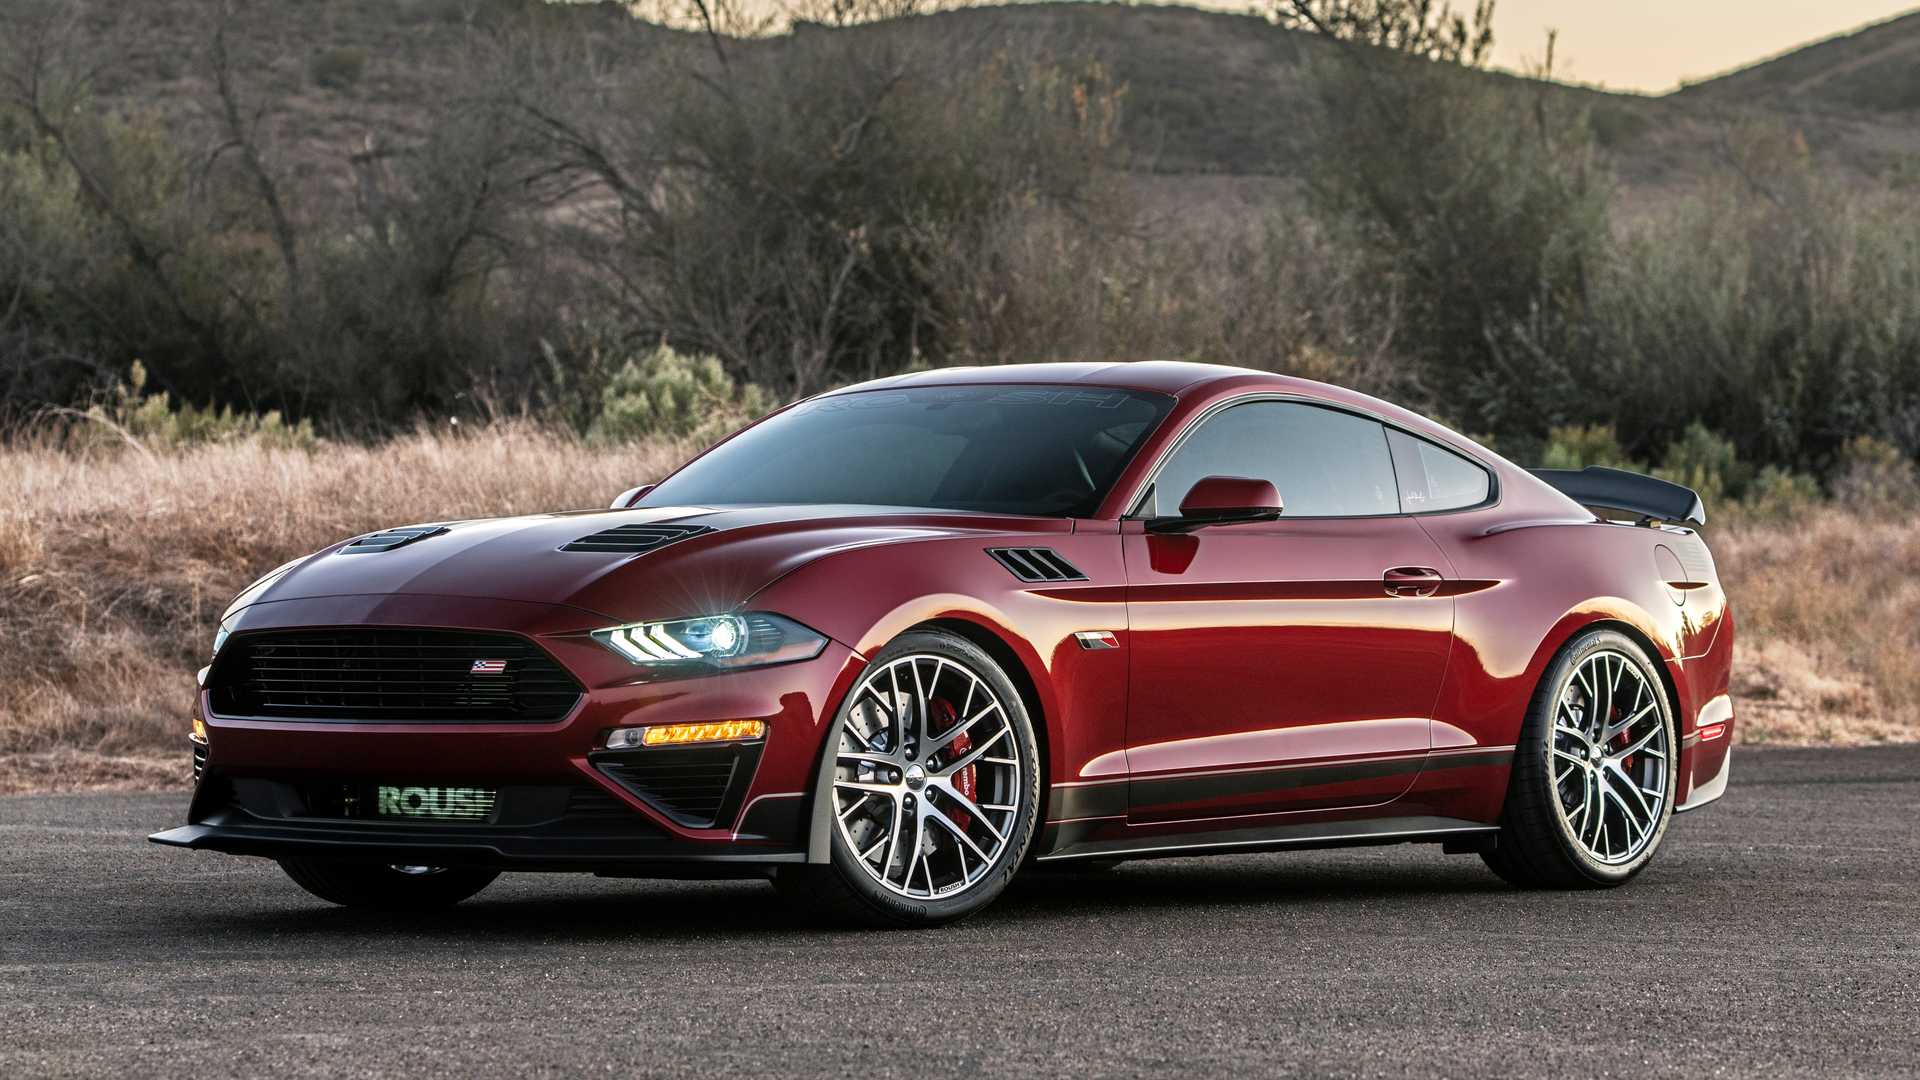 Mustang Of The Day: 2020 Jack Roush Edition Mustang